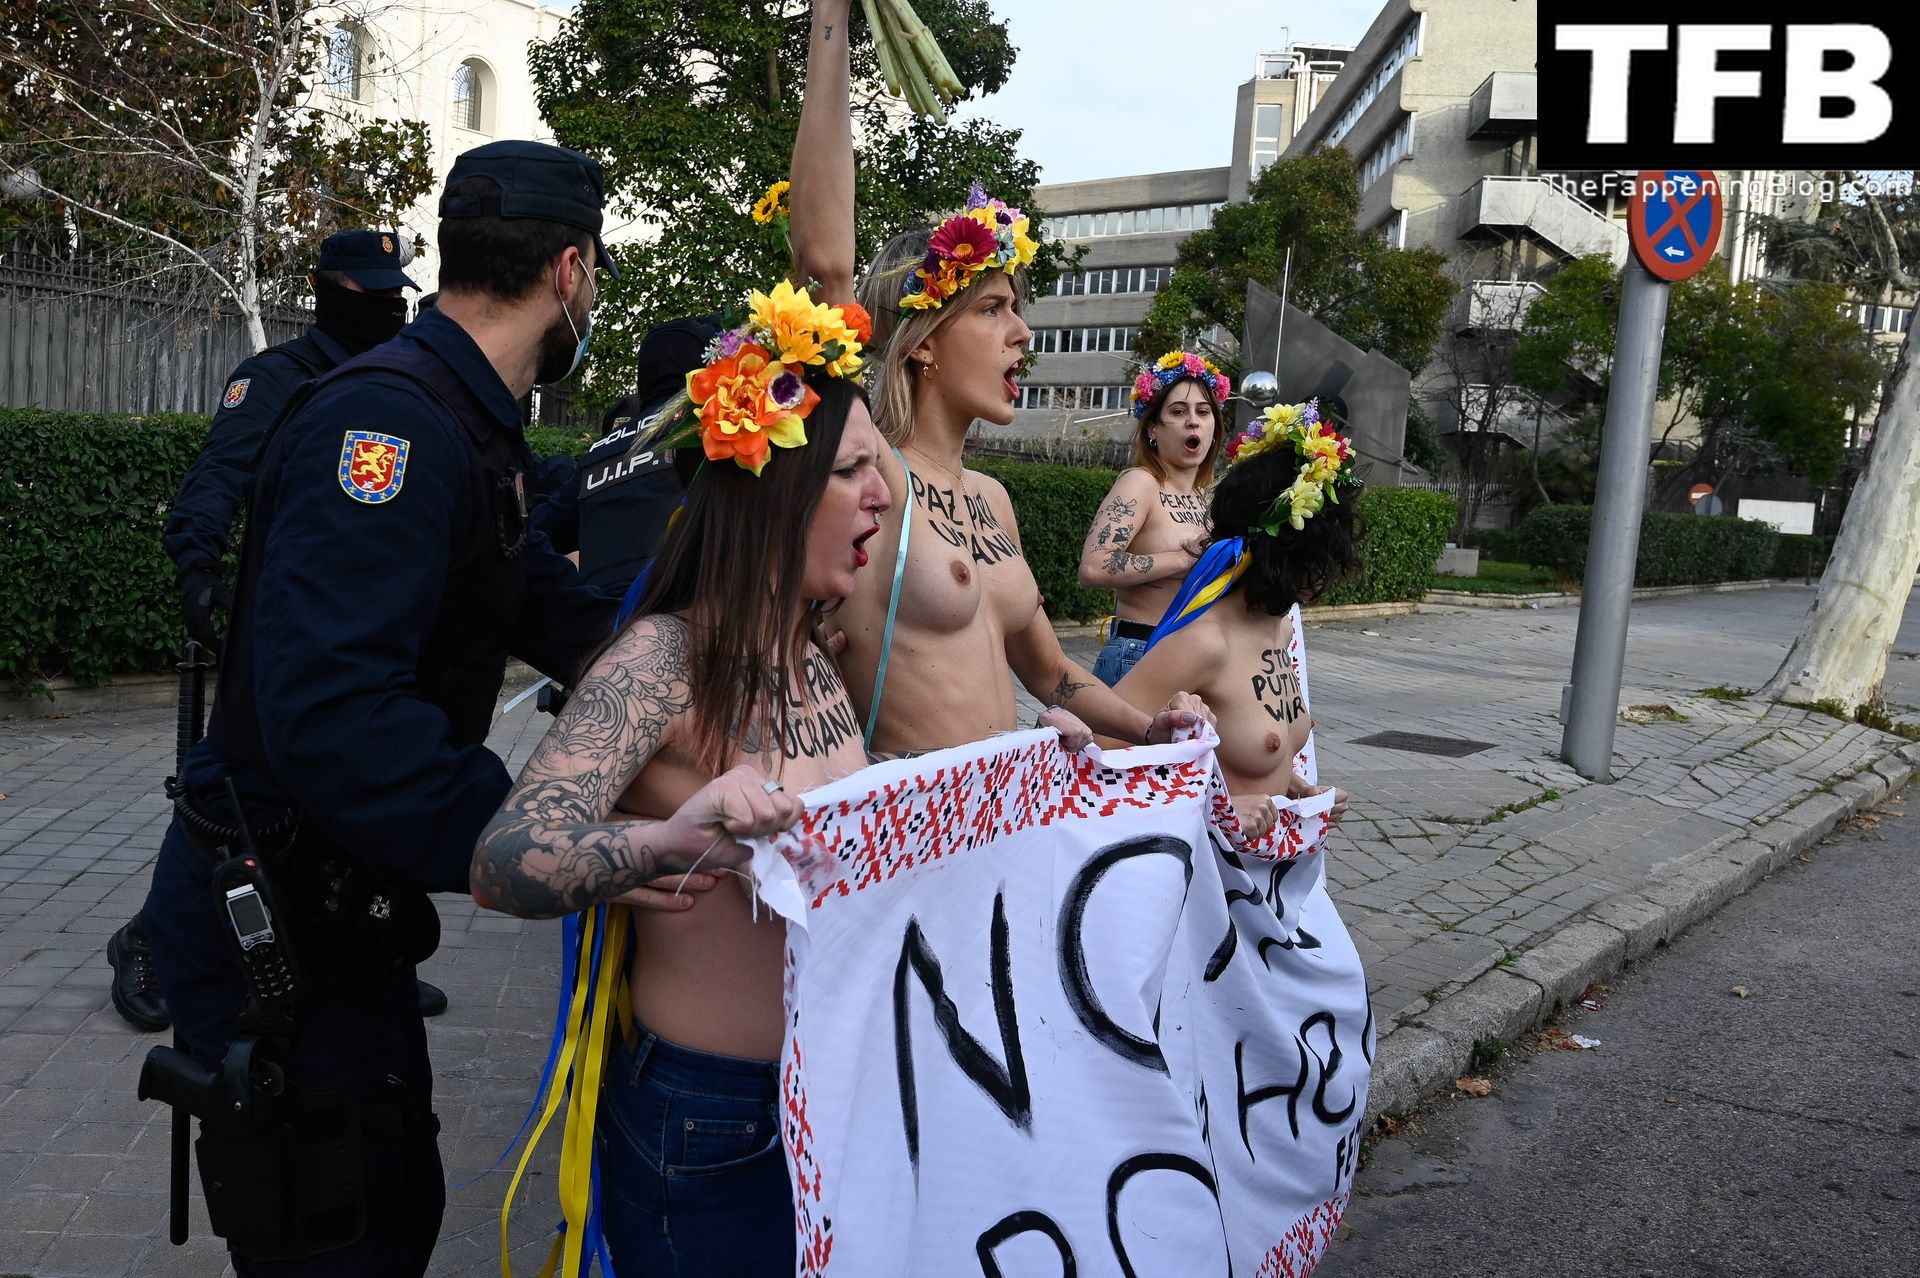 Topless-female-activists-The-Fappening-Blog-7.jpg